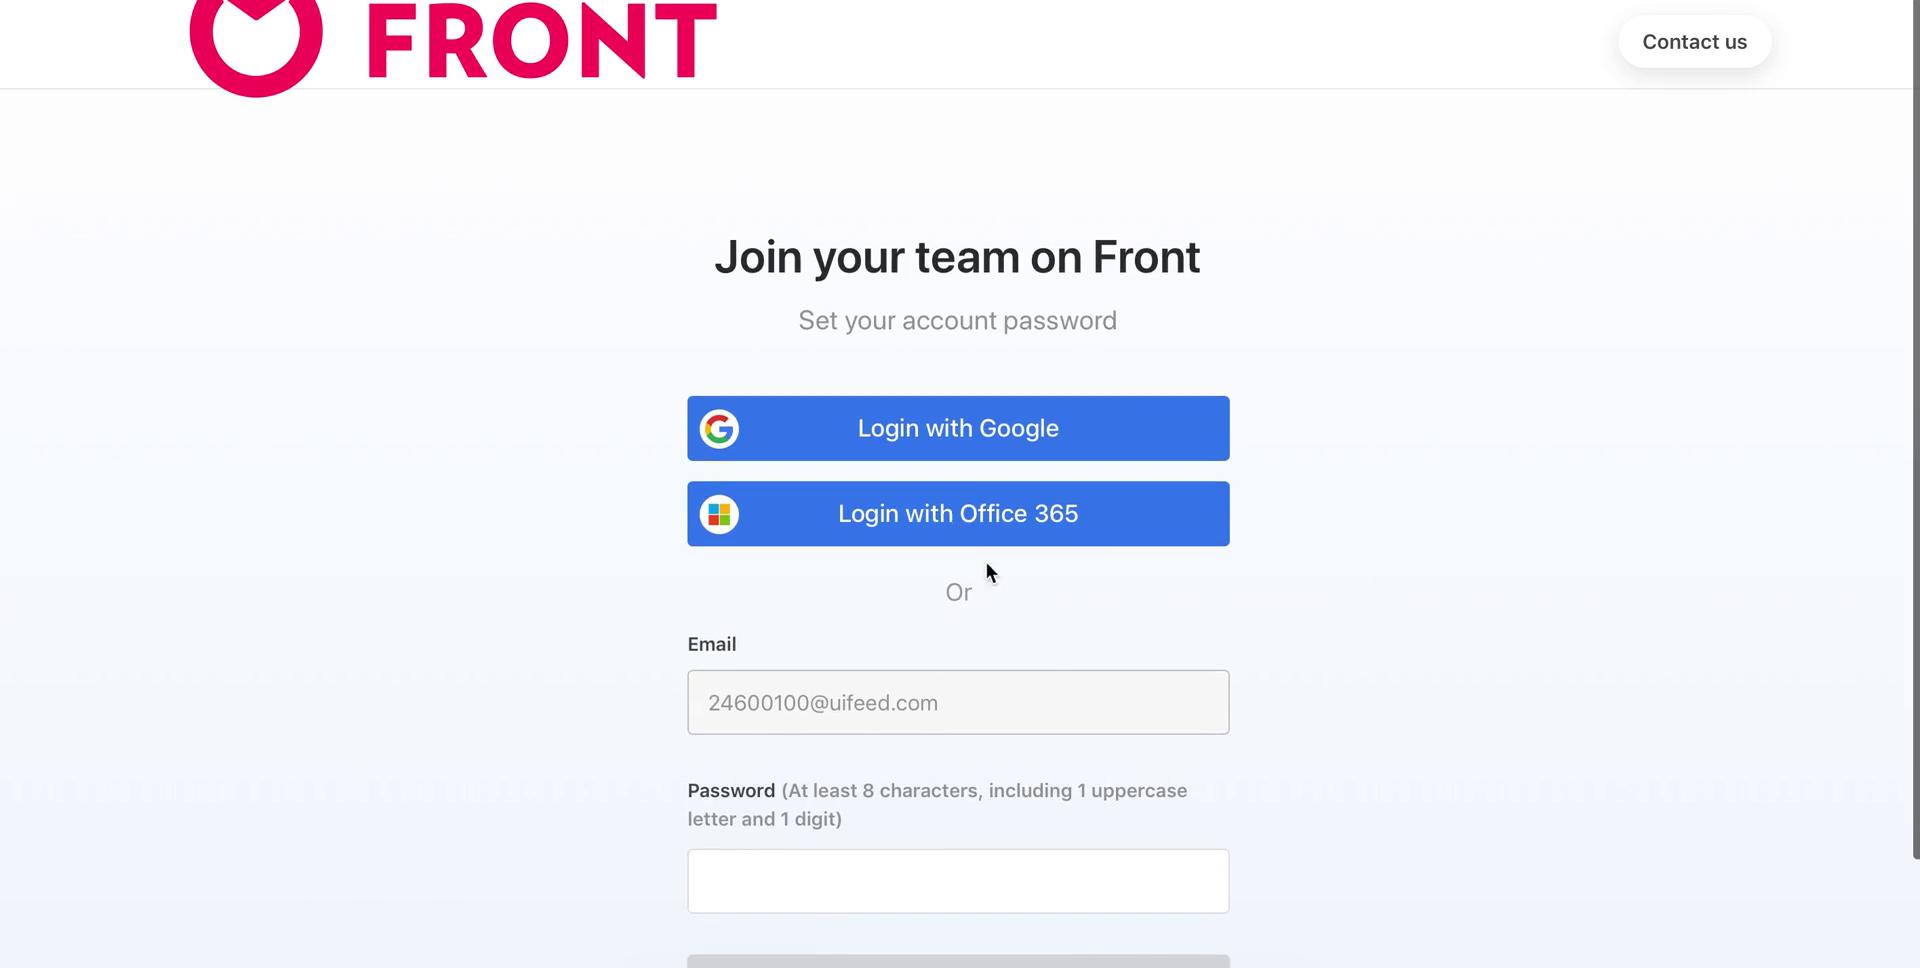 Screenshot of Sign up on Accepting an invite on Front user flow